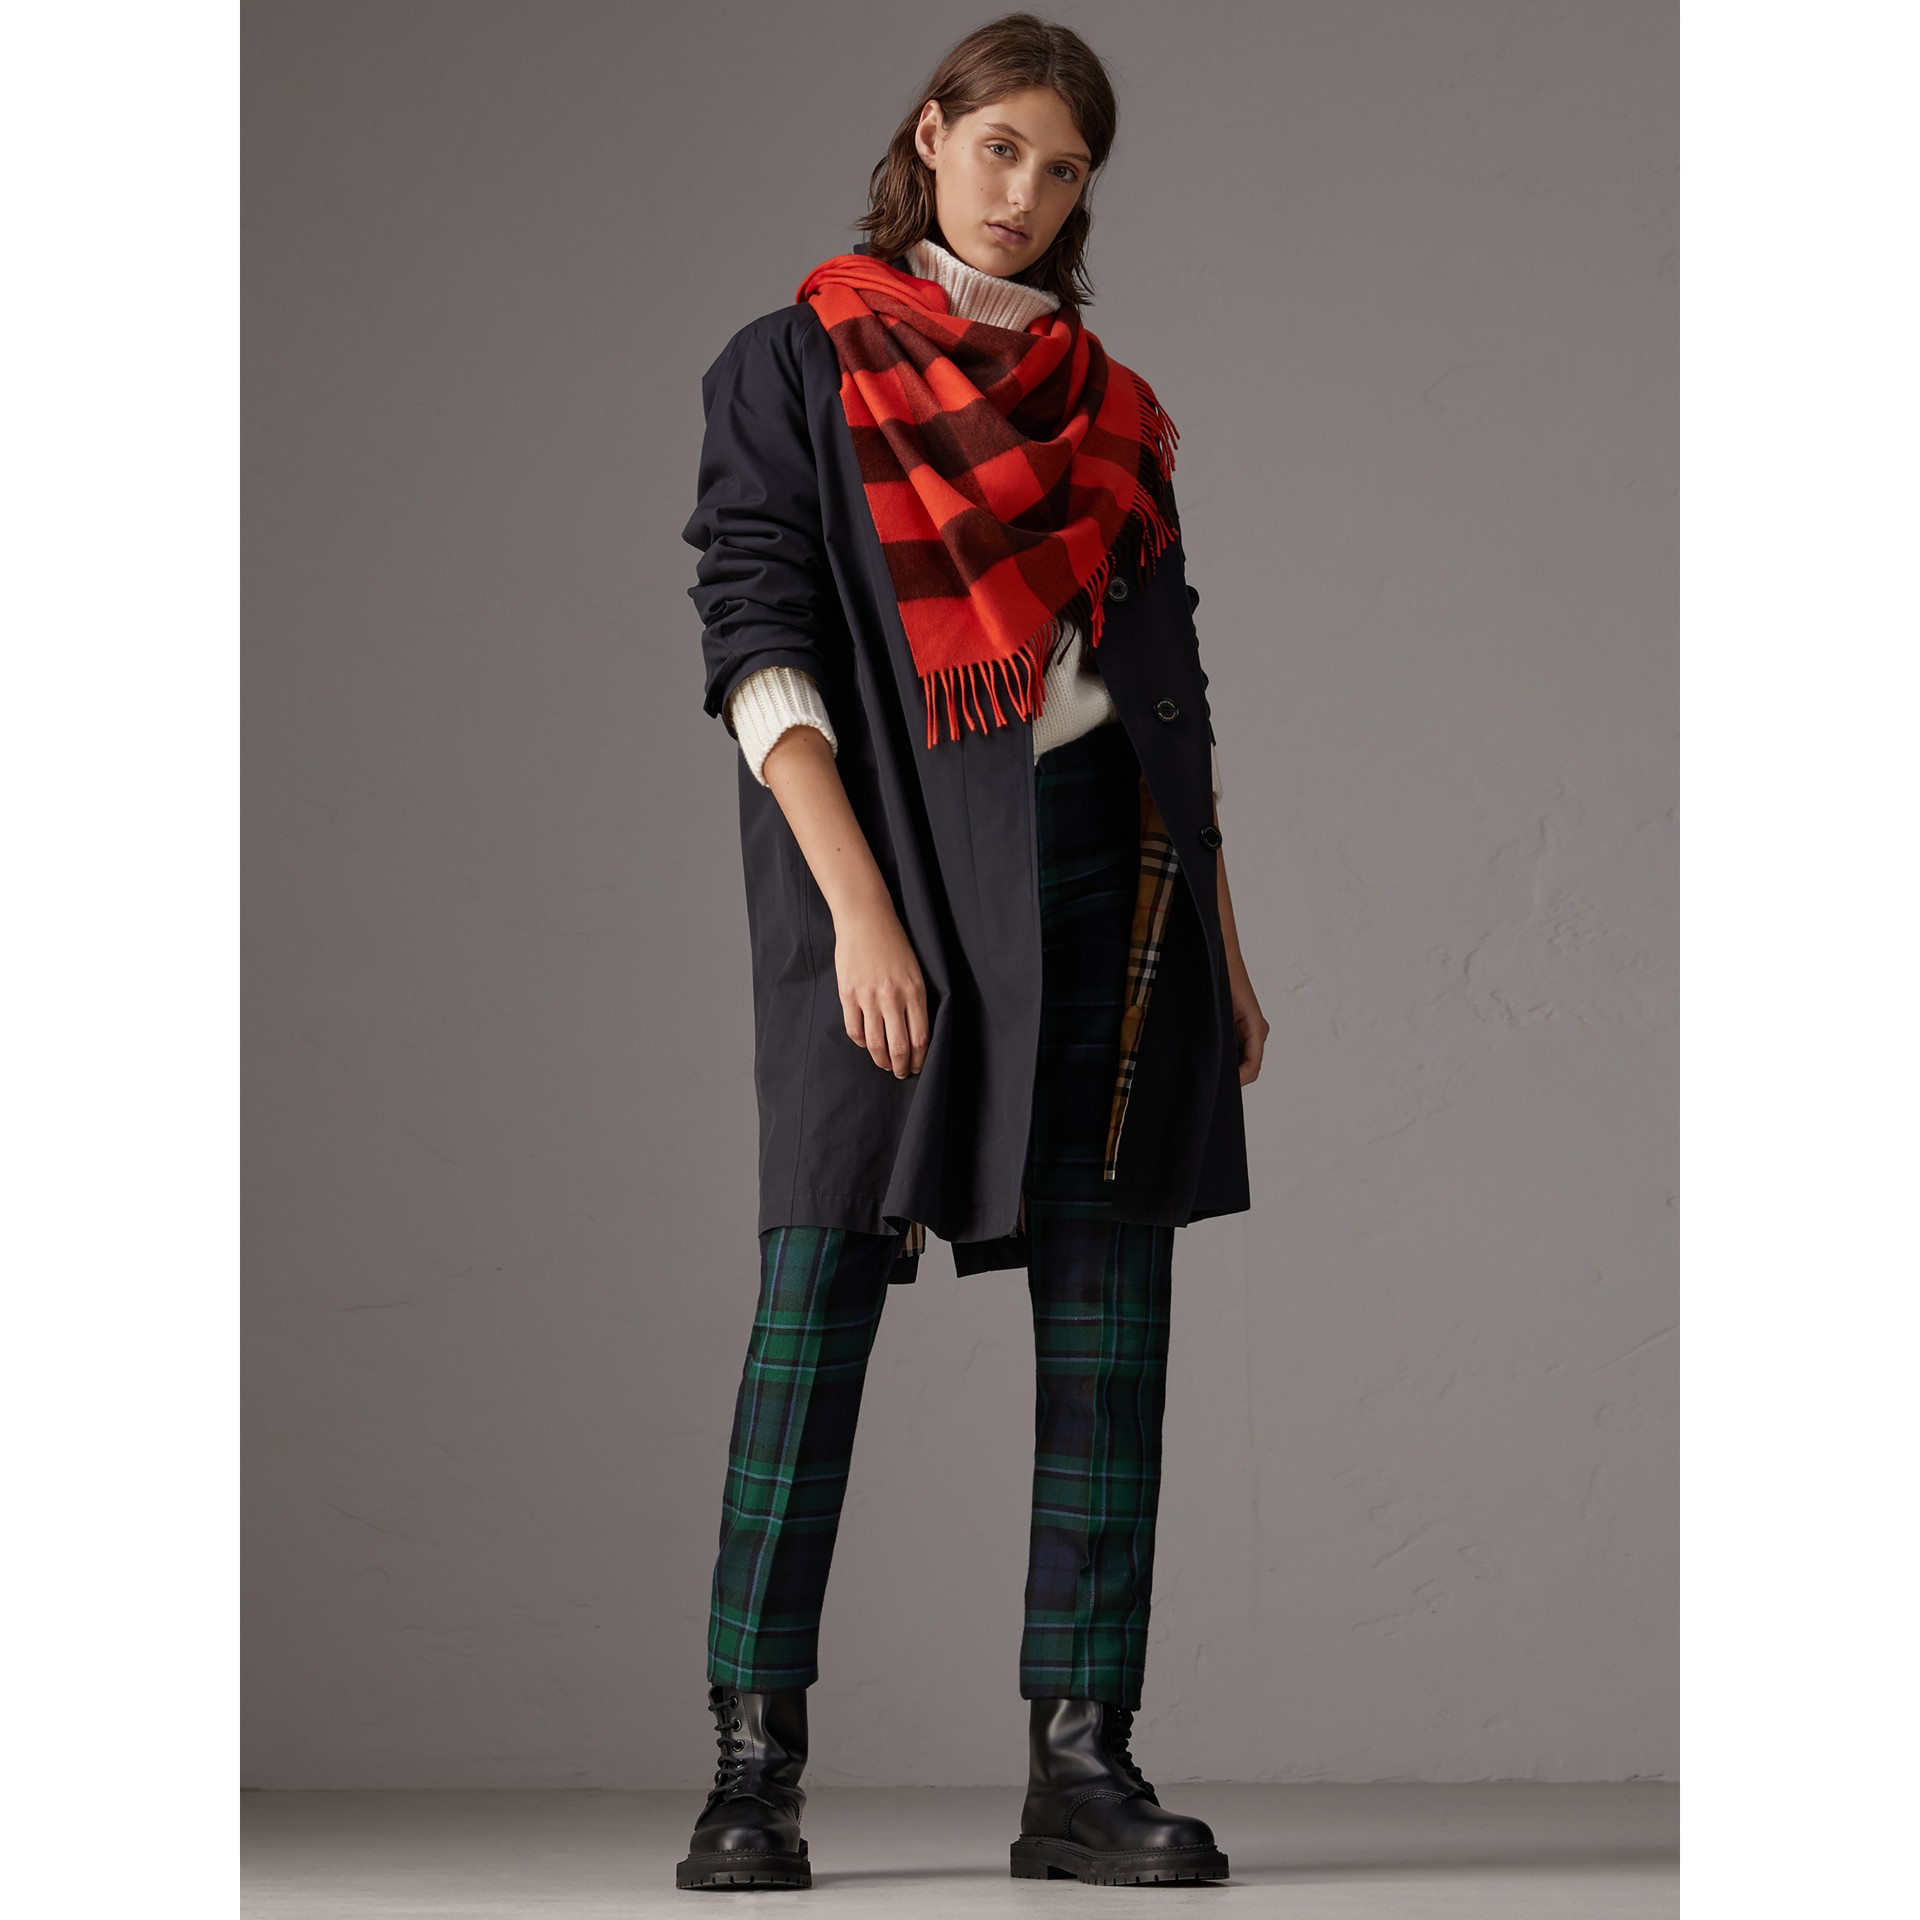 The Burberry Bandana in Check Cashmere in Orange Red | Burberry United ...